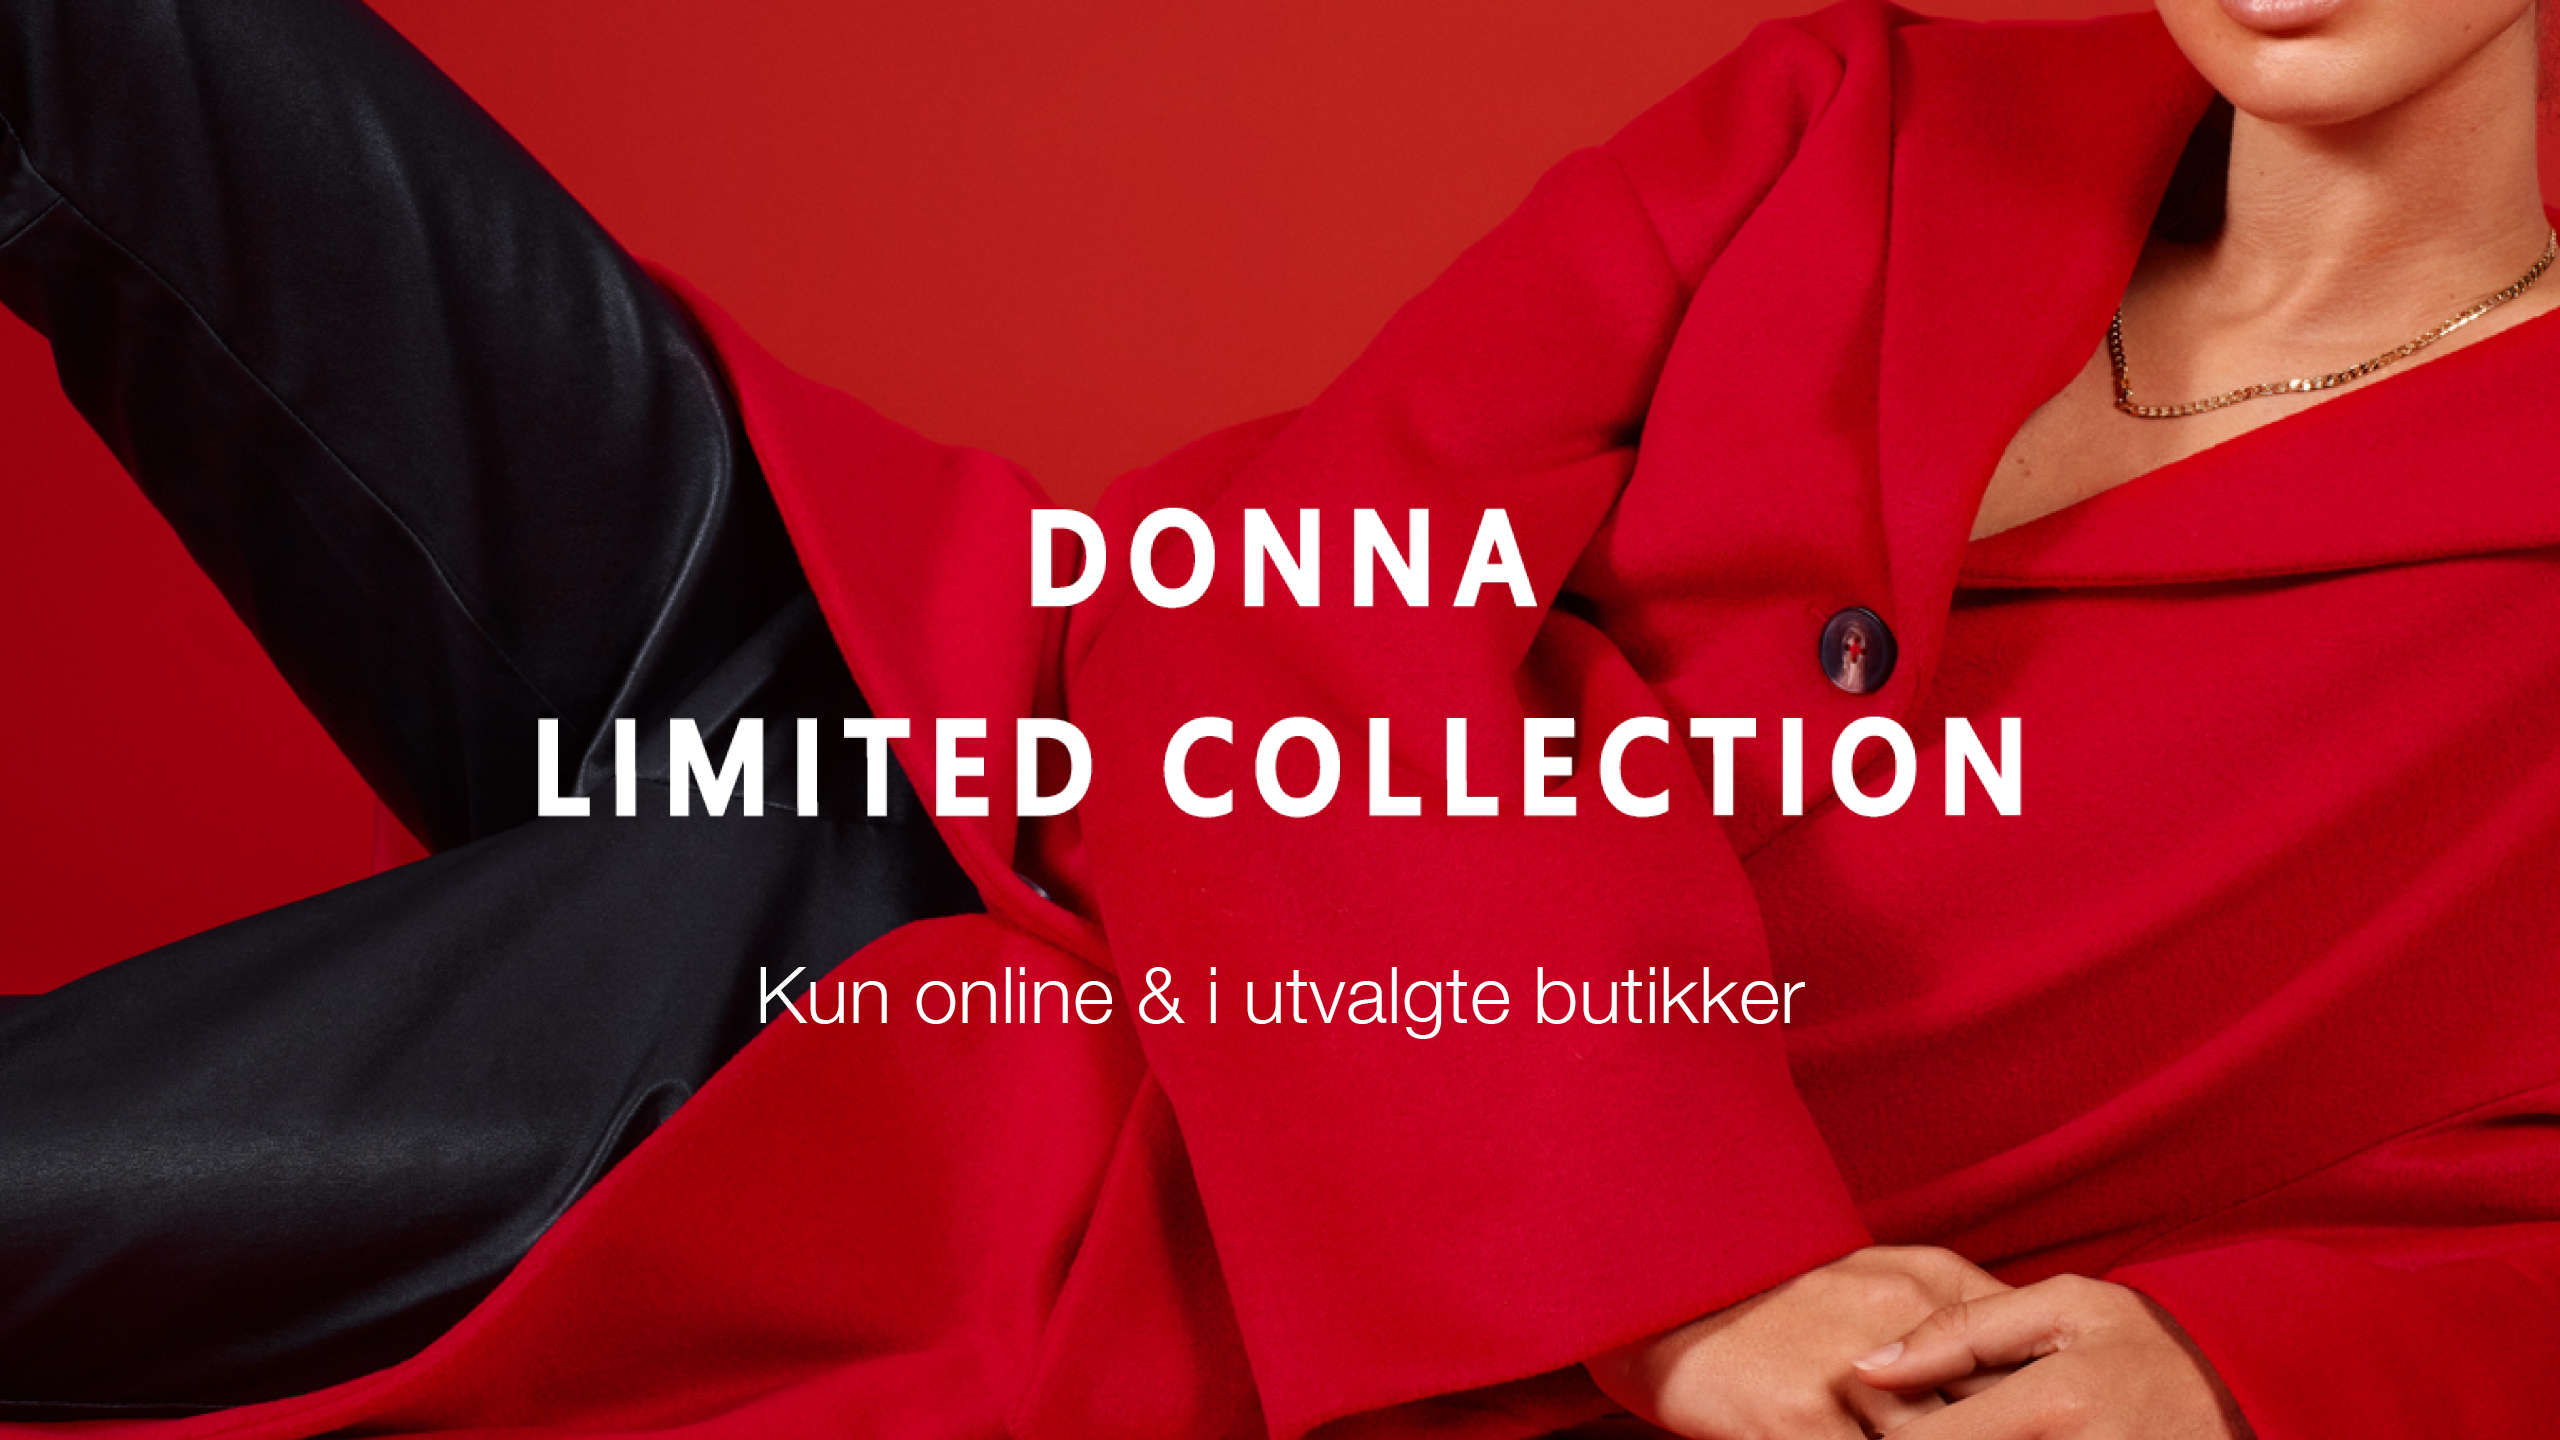 Donna Limited Collection